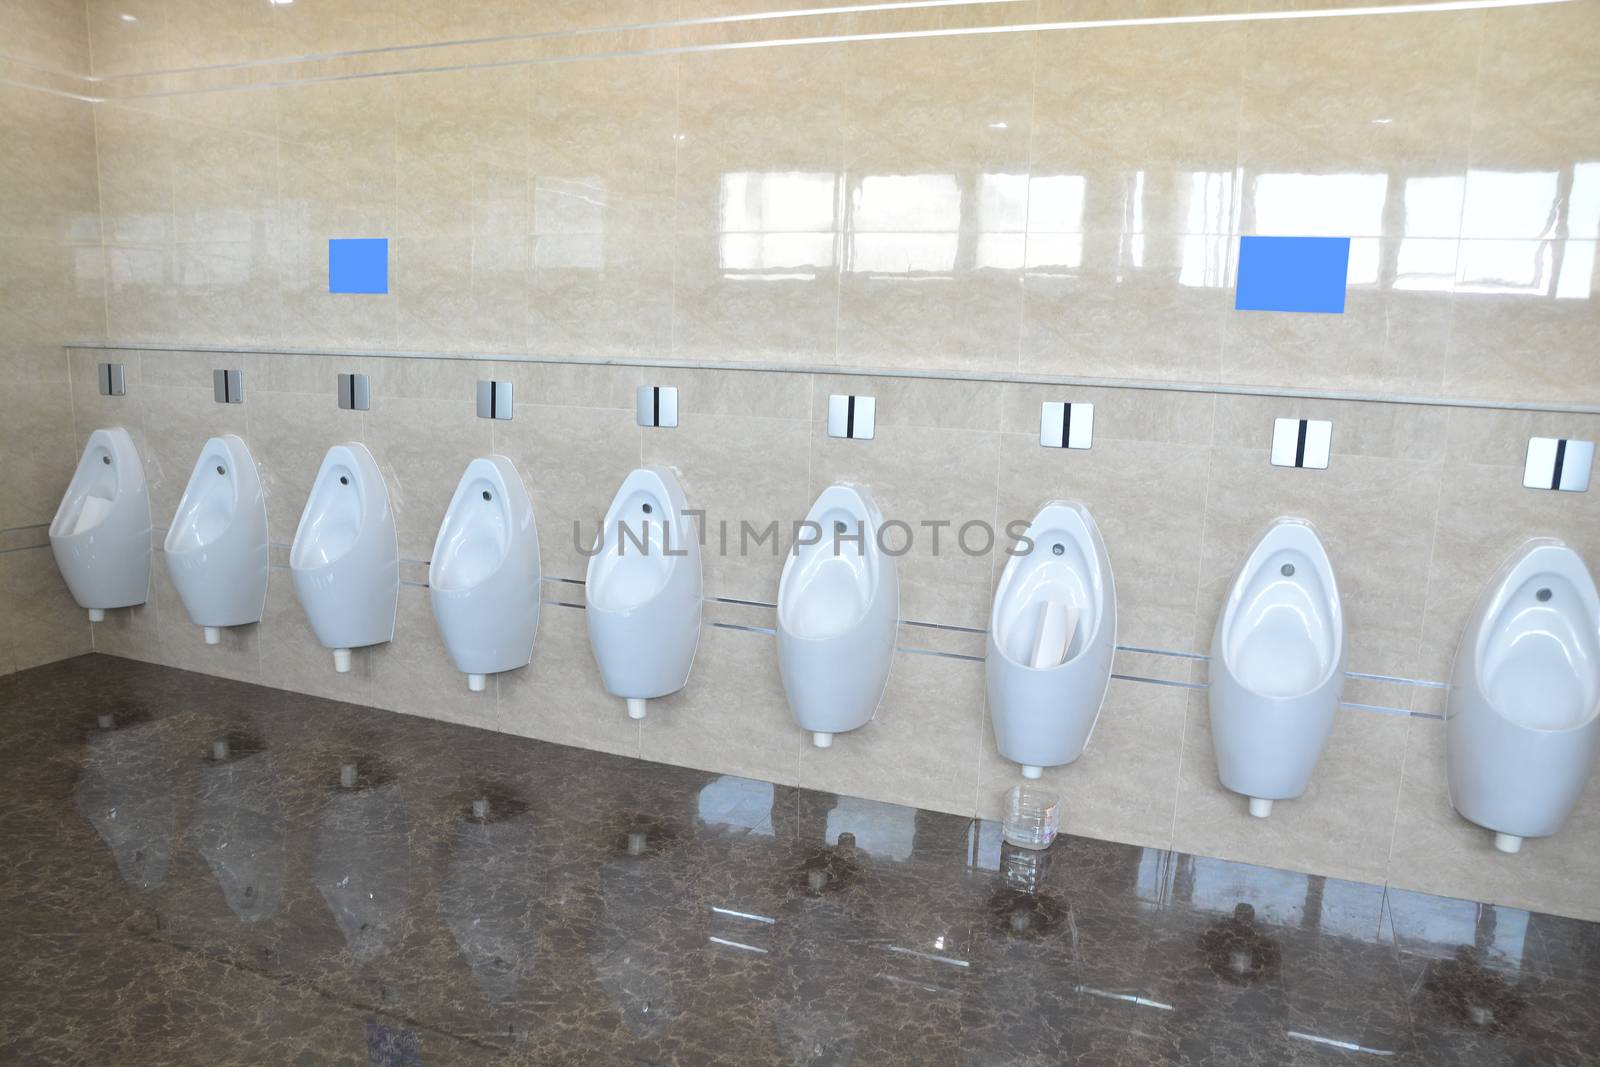 Row of urinal toilet blocks for man tiled wall in public toilet